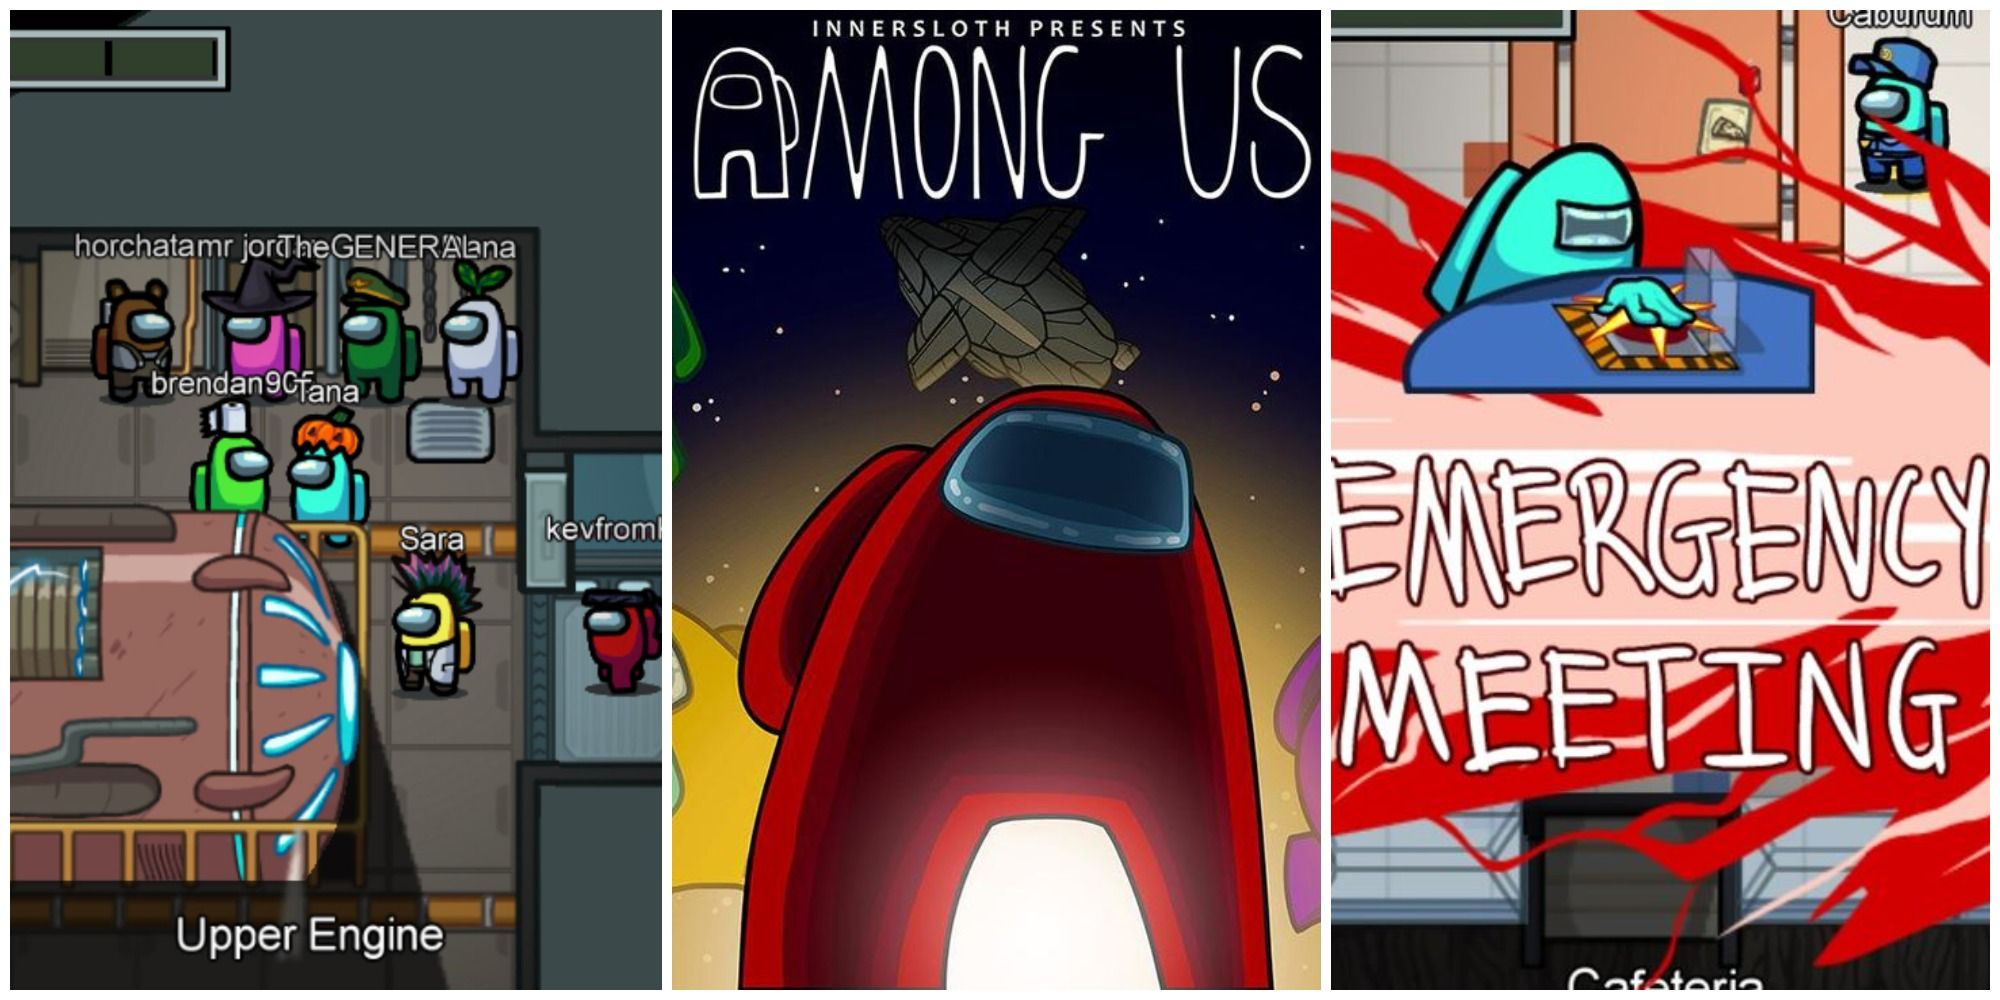 Among Us Online Game Inspires Heart-Wrenching Memes and New Narratives